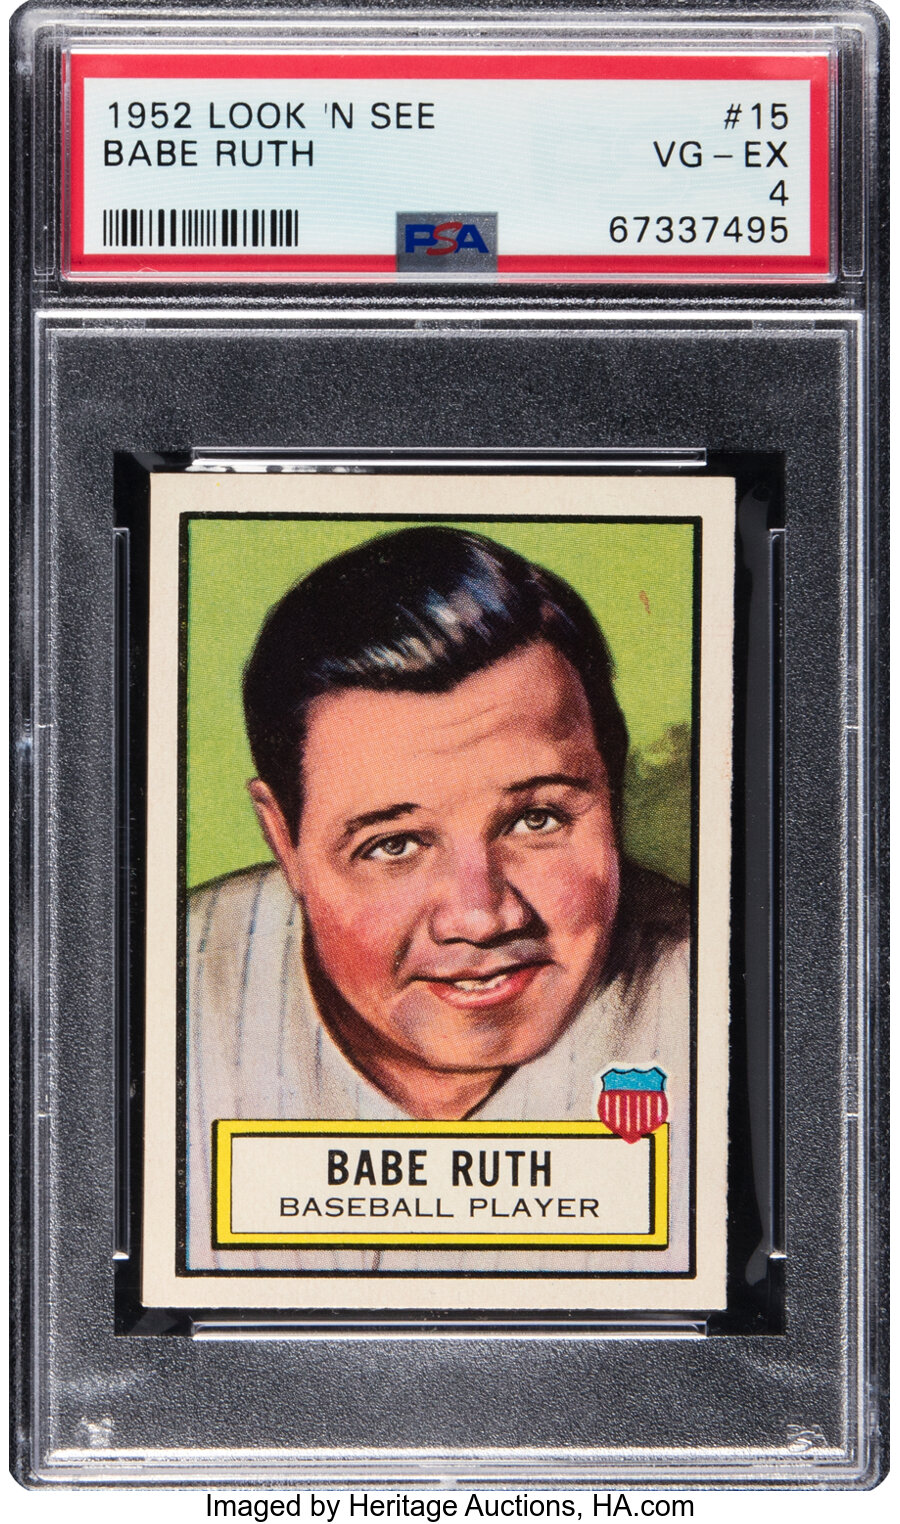 1952 Topps Look 'N See Babe Ruth #15 PSA VG-EX 4